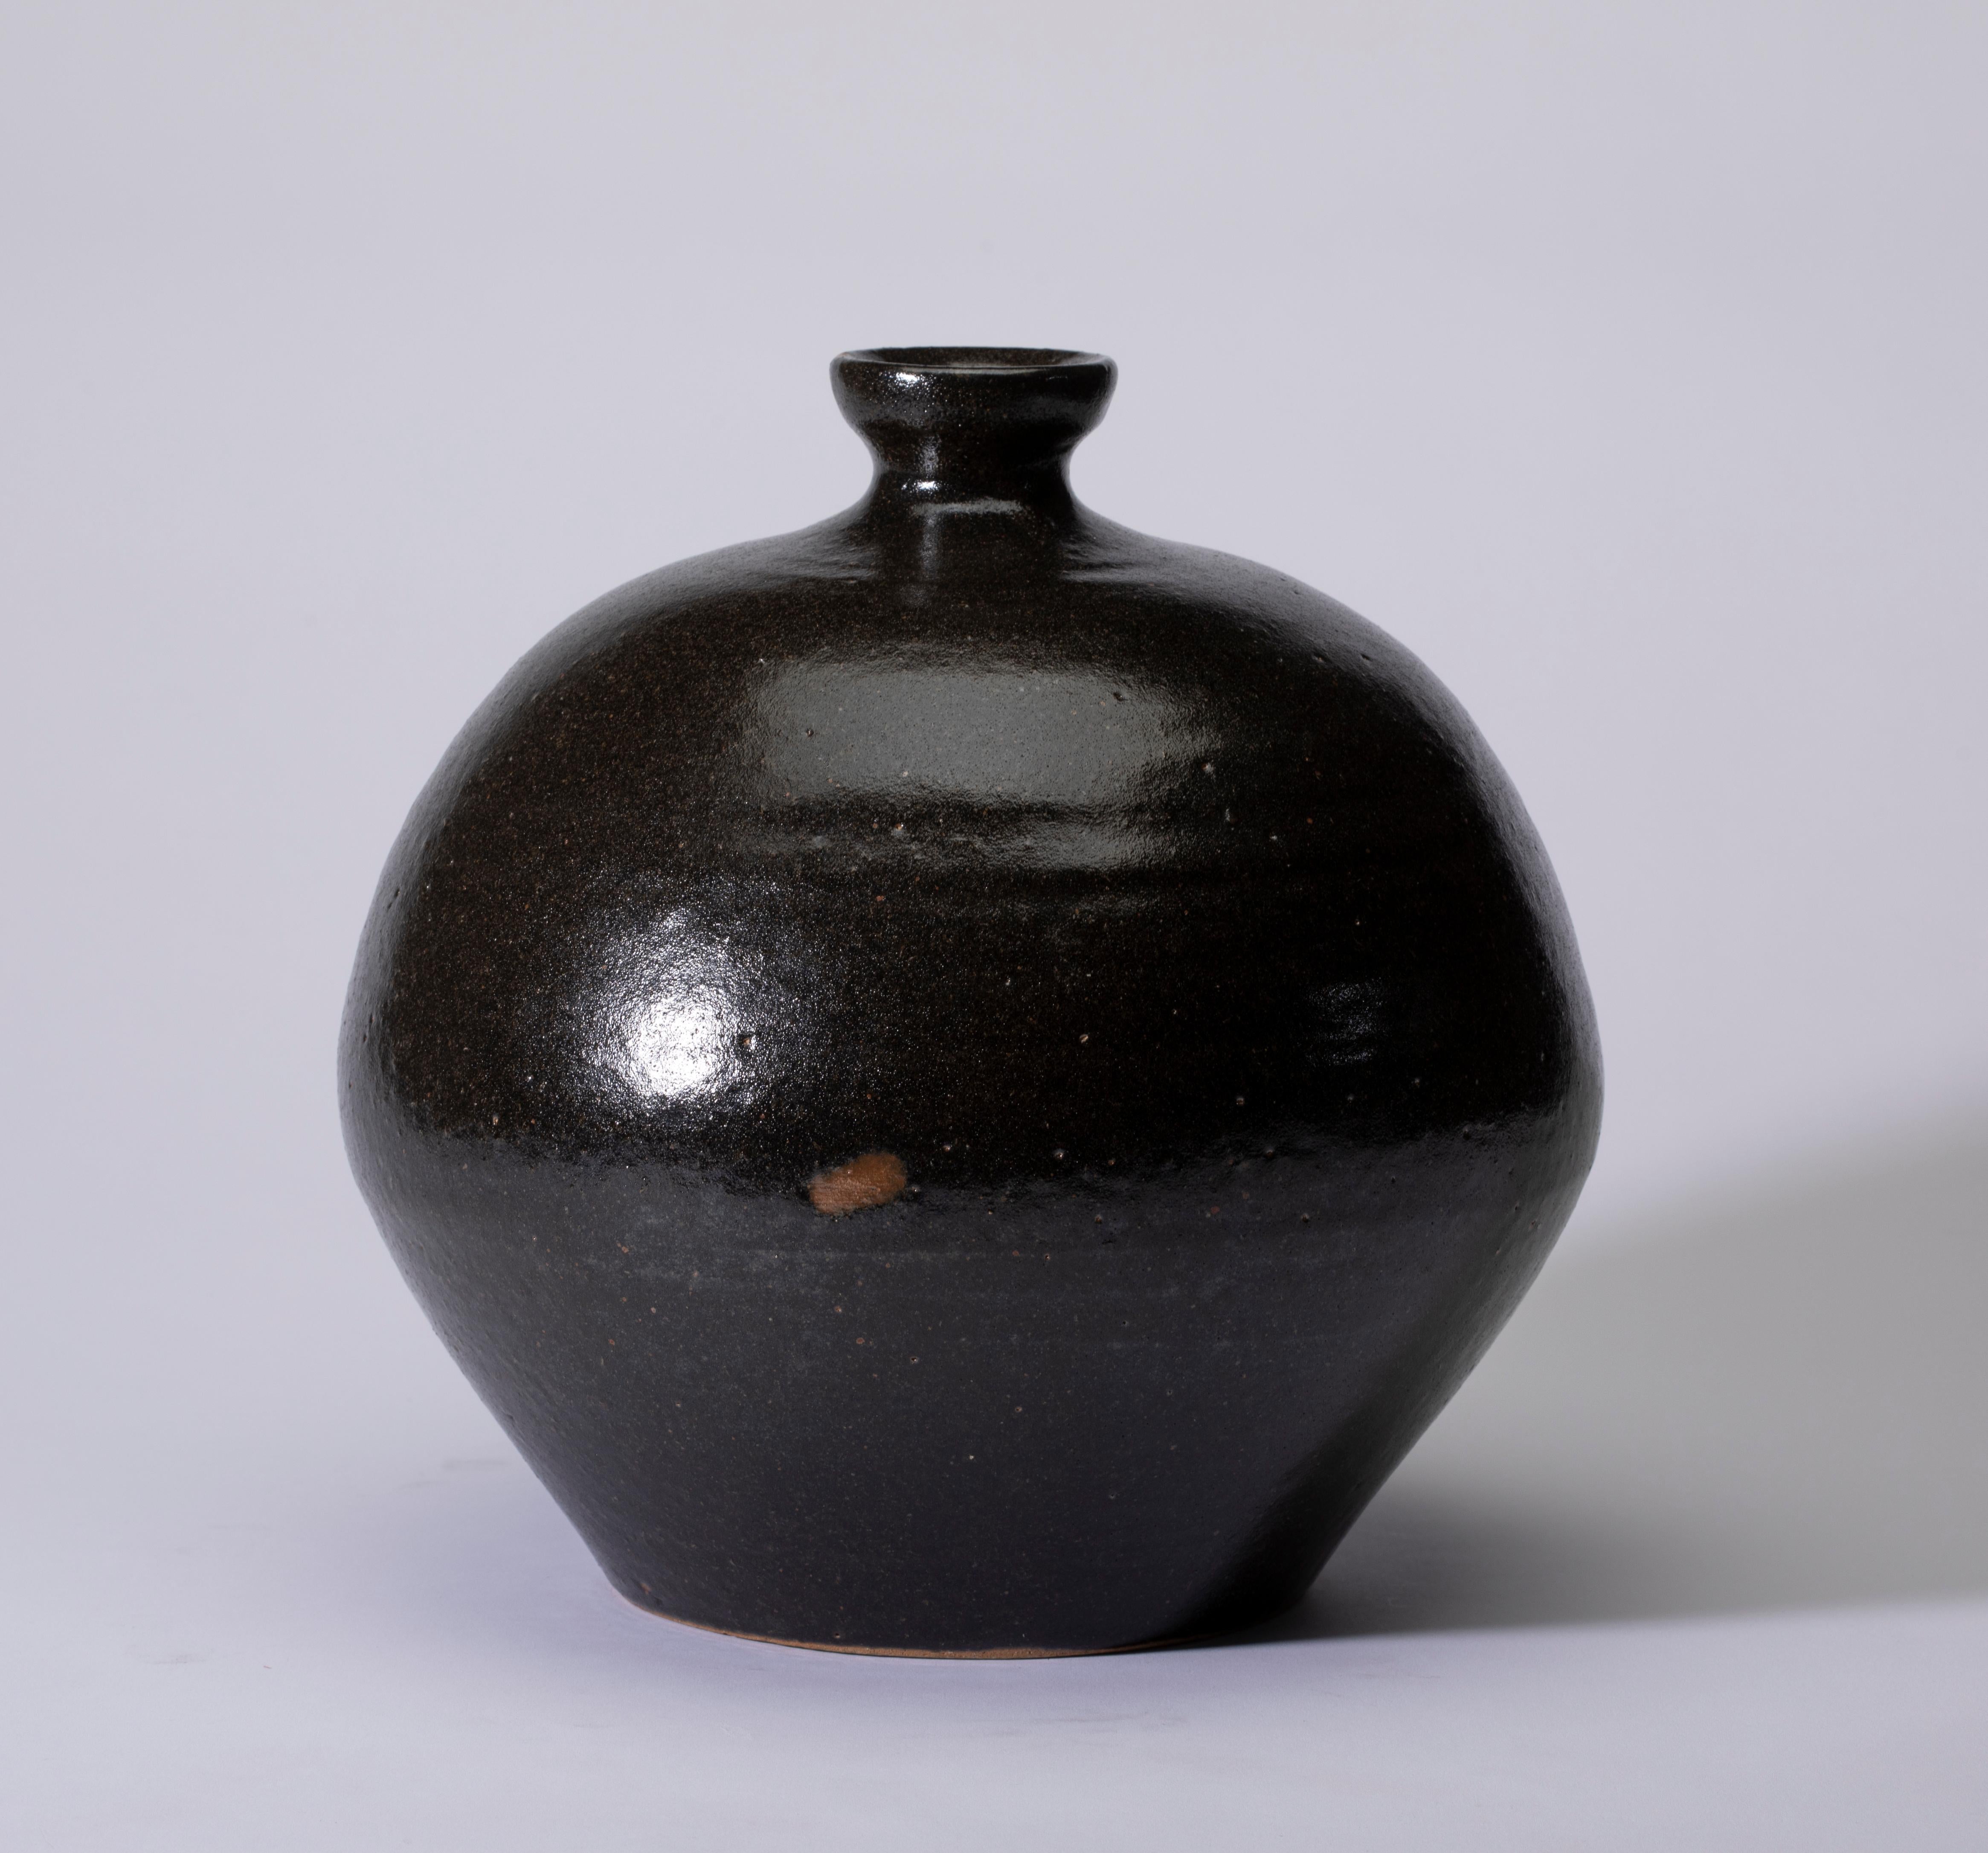 Black with Brown Undertones Mashiko Ware Vase 
Mashiko Ware Vase with Black Glaze with Brown Undertones
The Clay in the Region is a pure form of Clay rich in silicic acid and iron which produces the Deep Color, Highlighted by a Glaze which